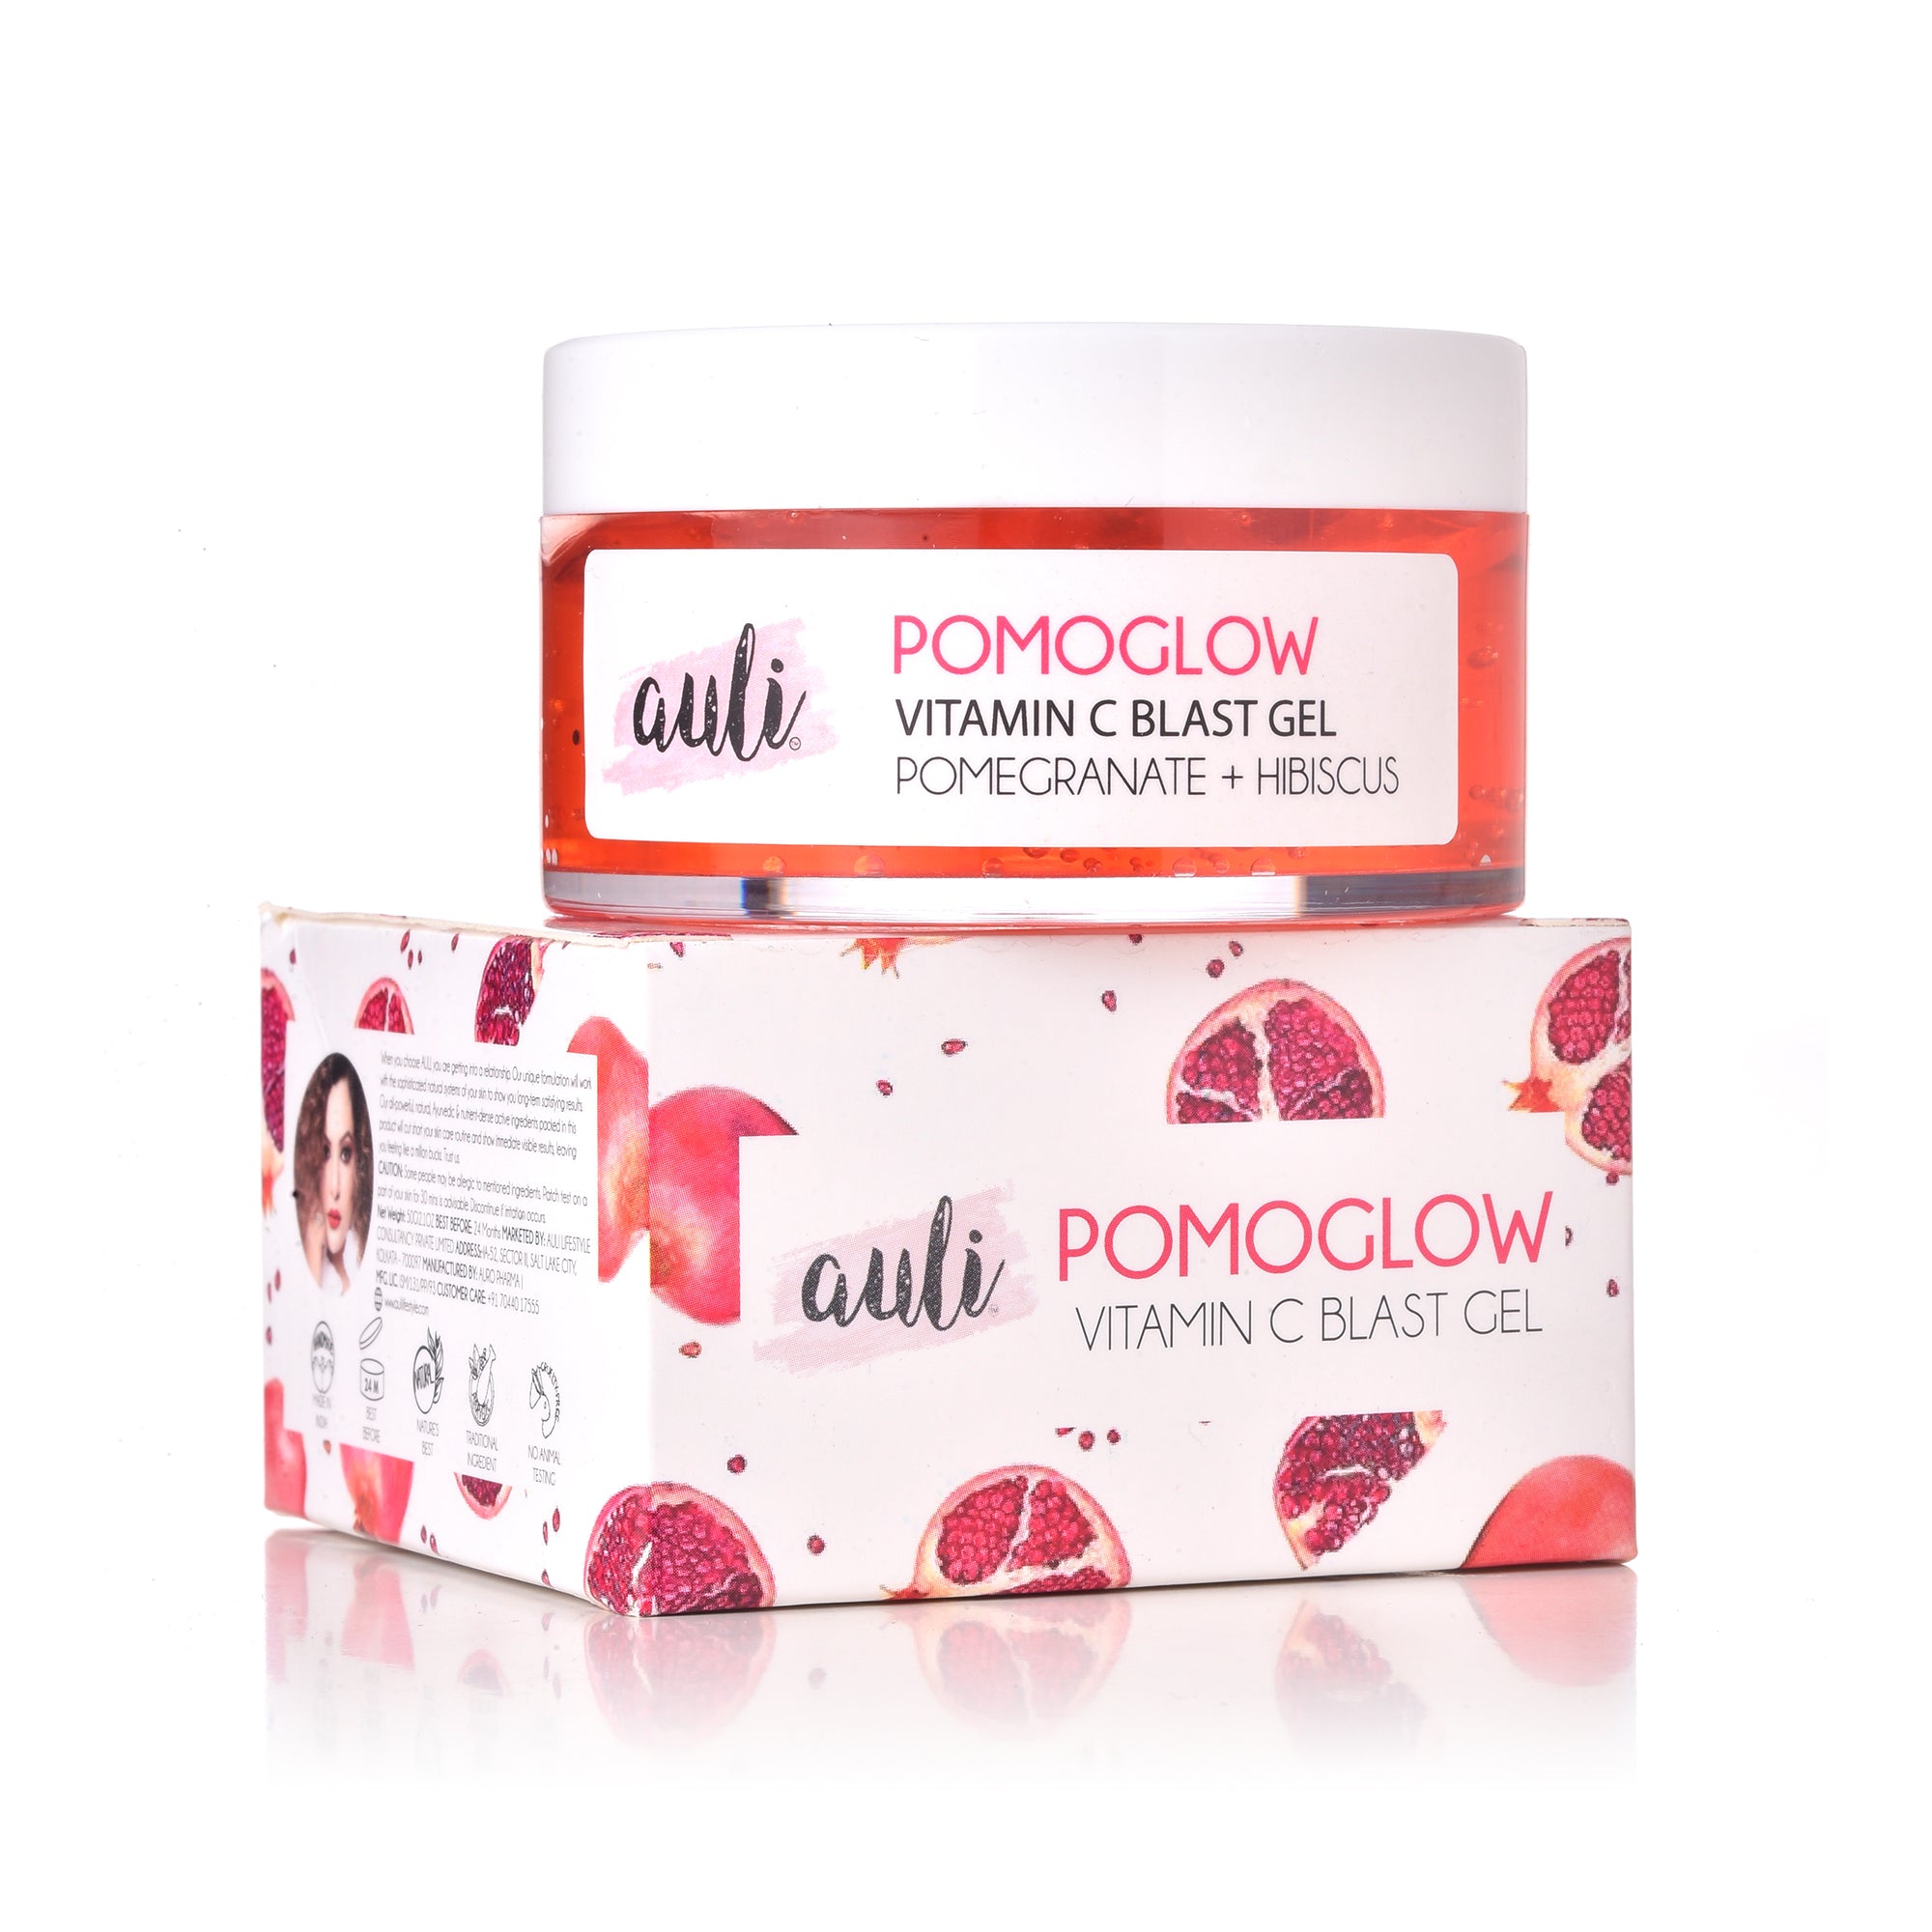 Auli Pomoglow Pomegranate and Vitamin C Blast Gel for all skin types, rich in Antioxidants ,helps treat sun damage and hydrates skin deeply - 50GM